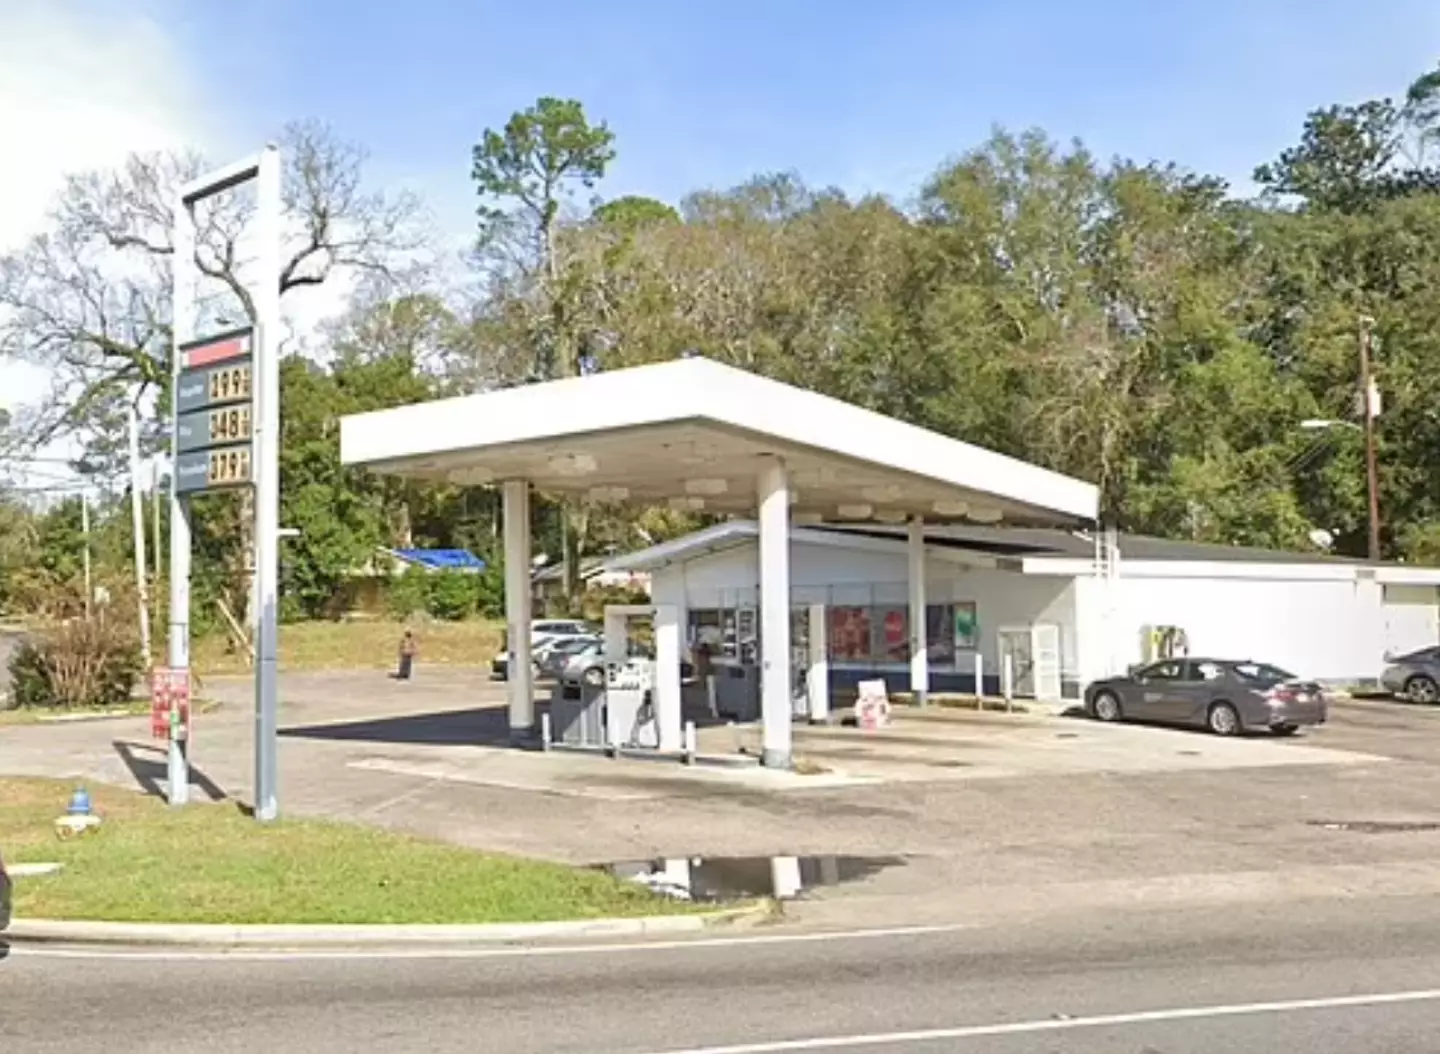 The petrol station in Mobile.